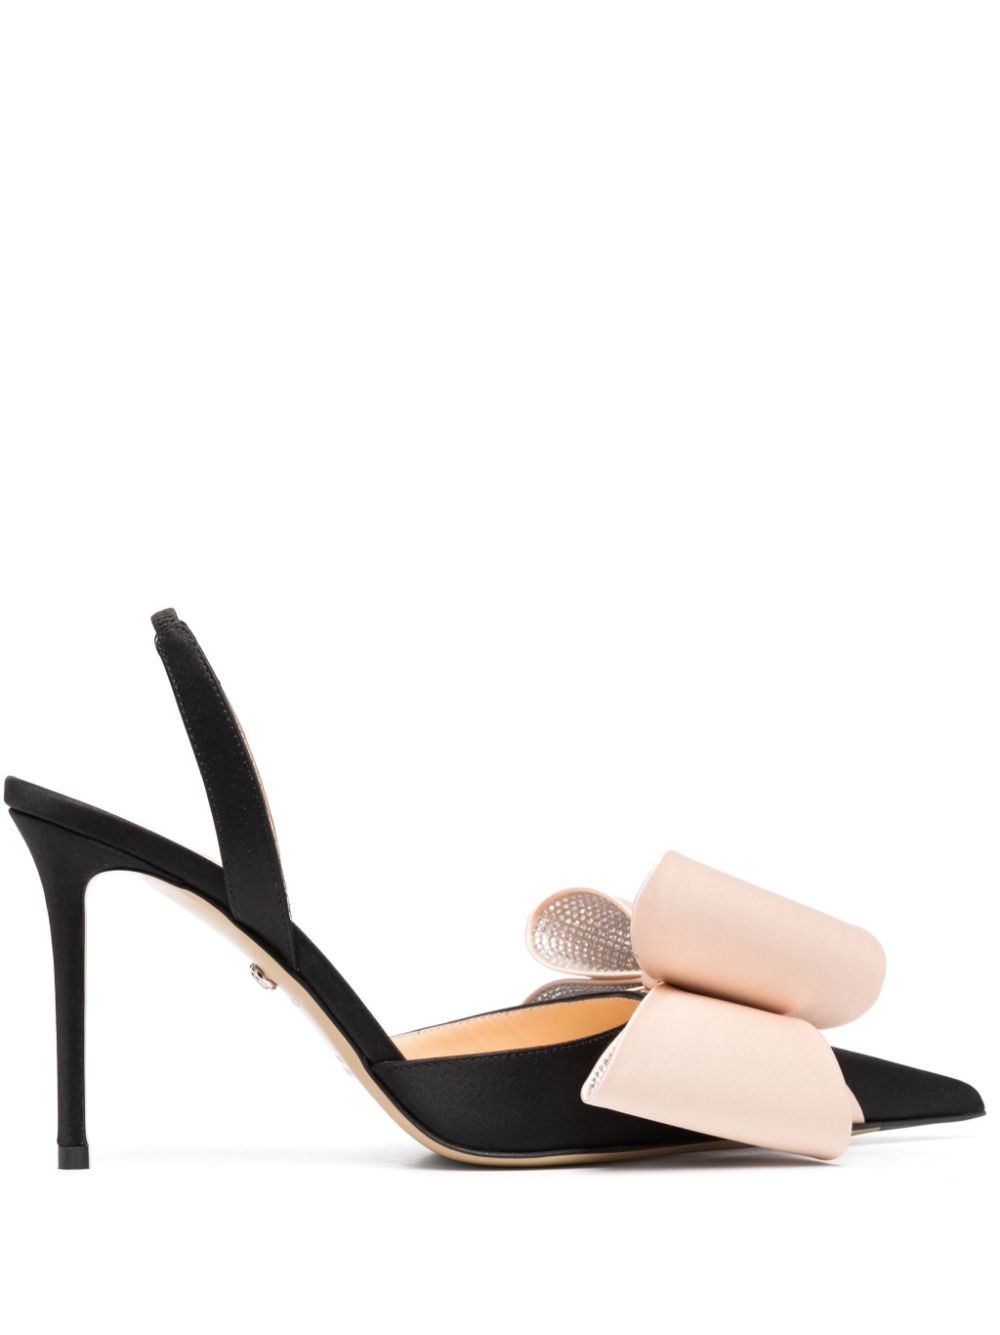 Ines leather-trimmed satin slingback pumps in white - Saint Laurent |  Mytheresa